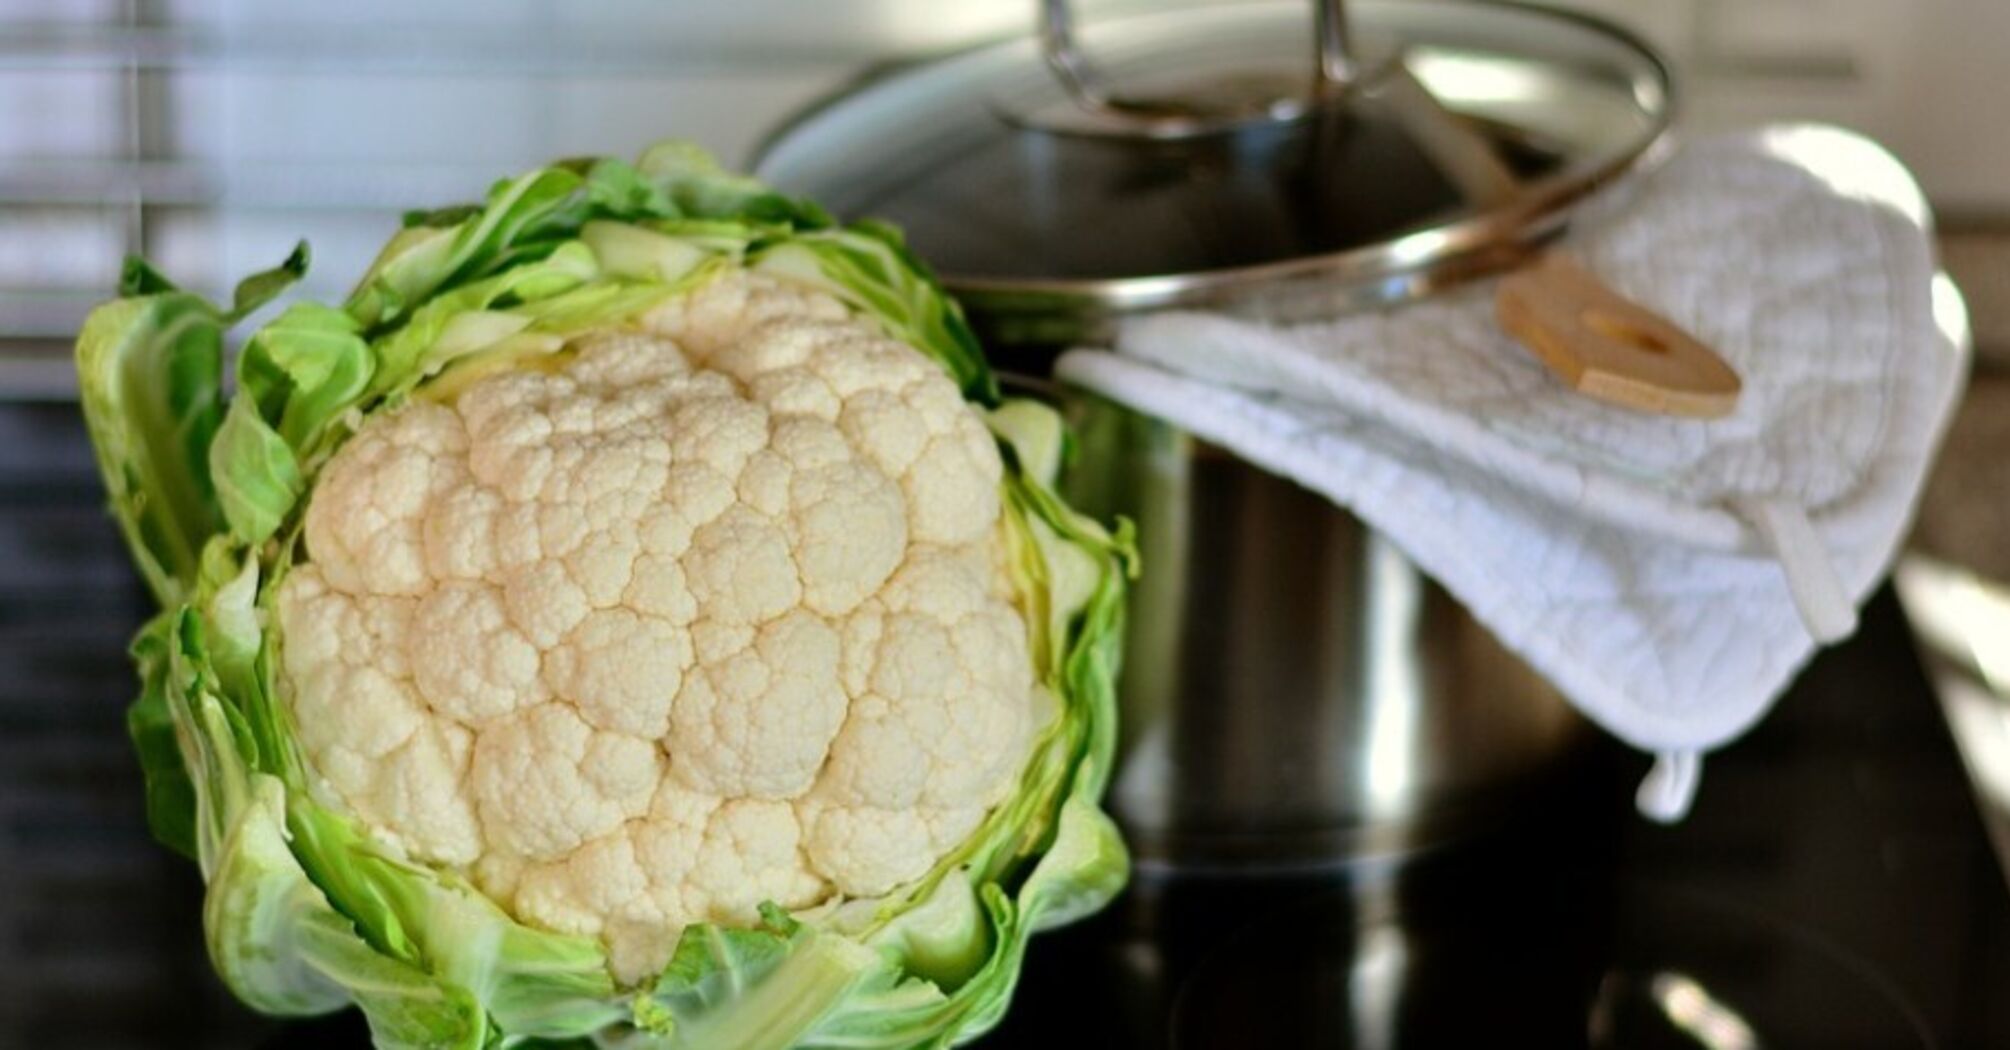 How to cook cauliflower deliciously in 15 minutes: crispy and odorless